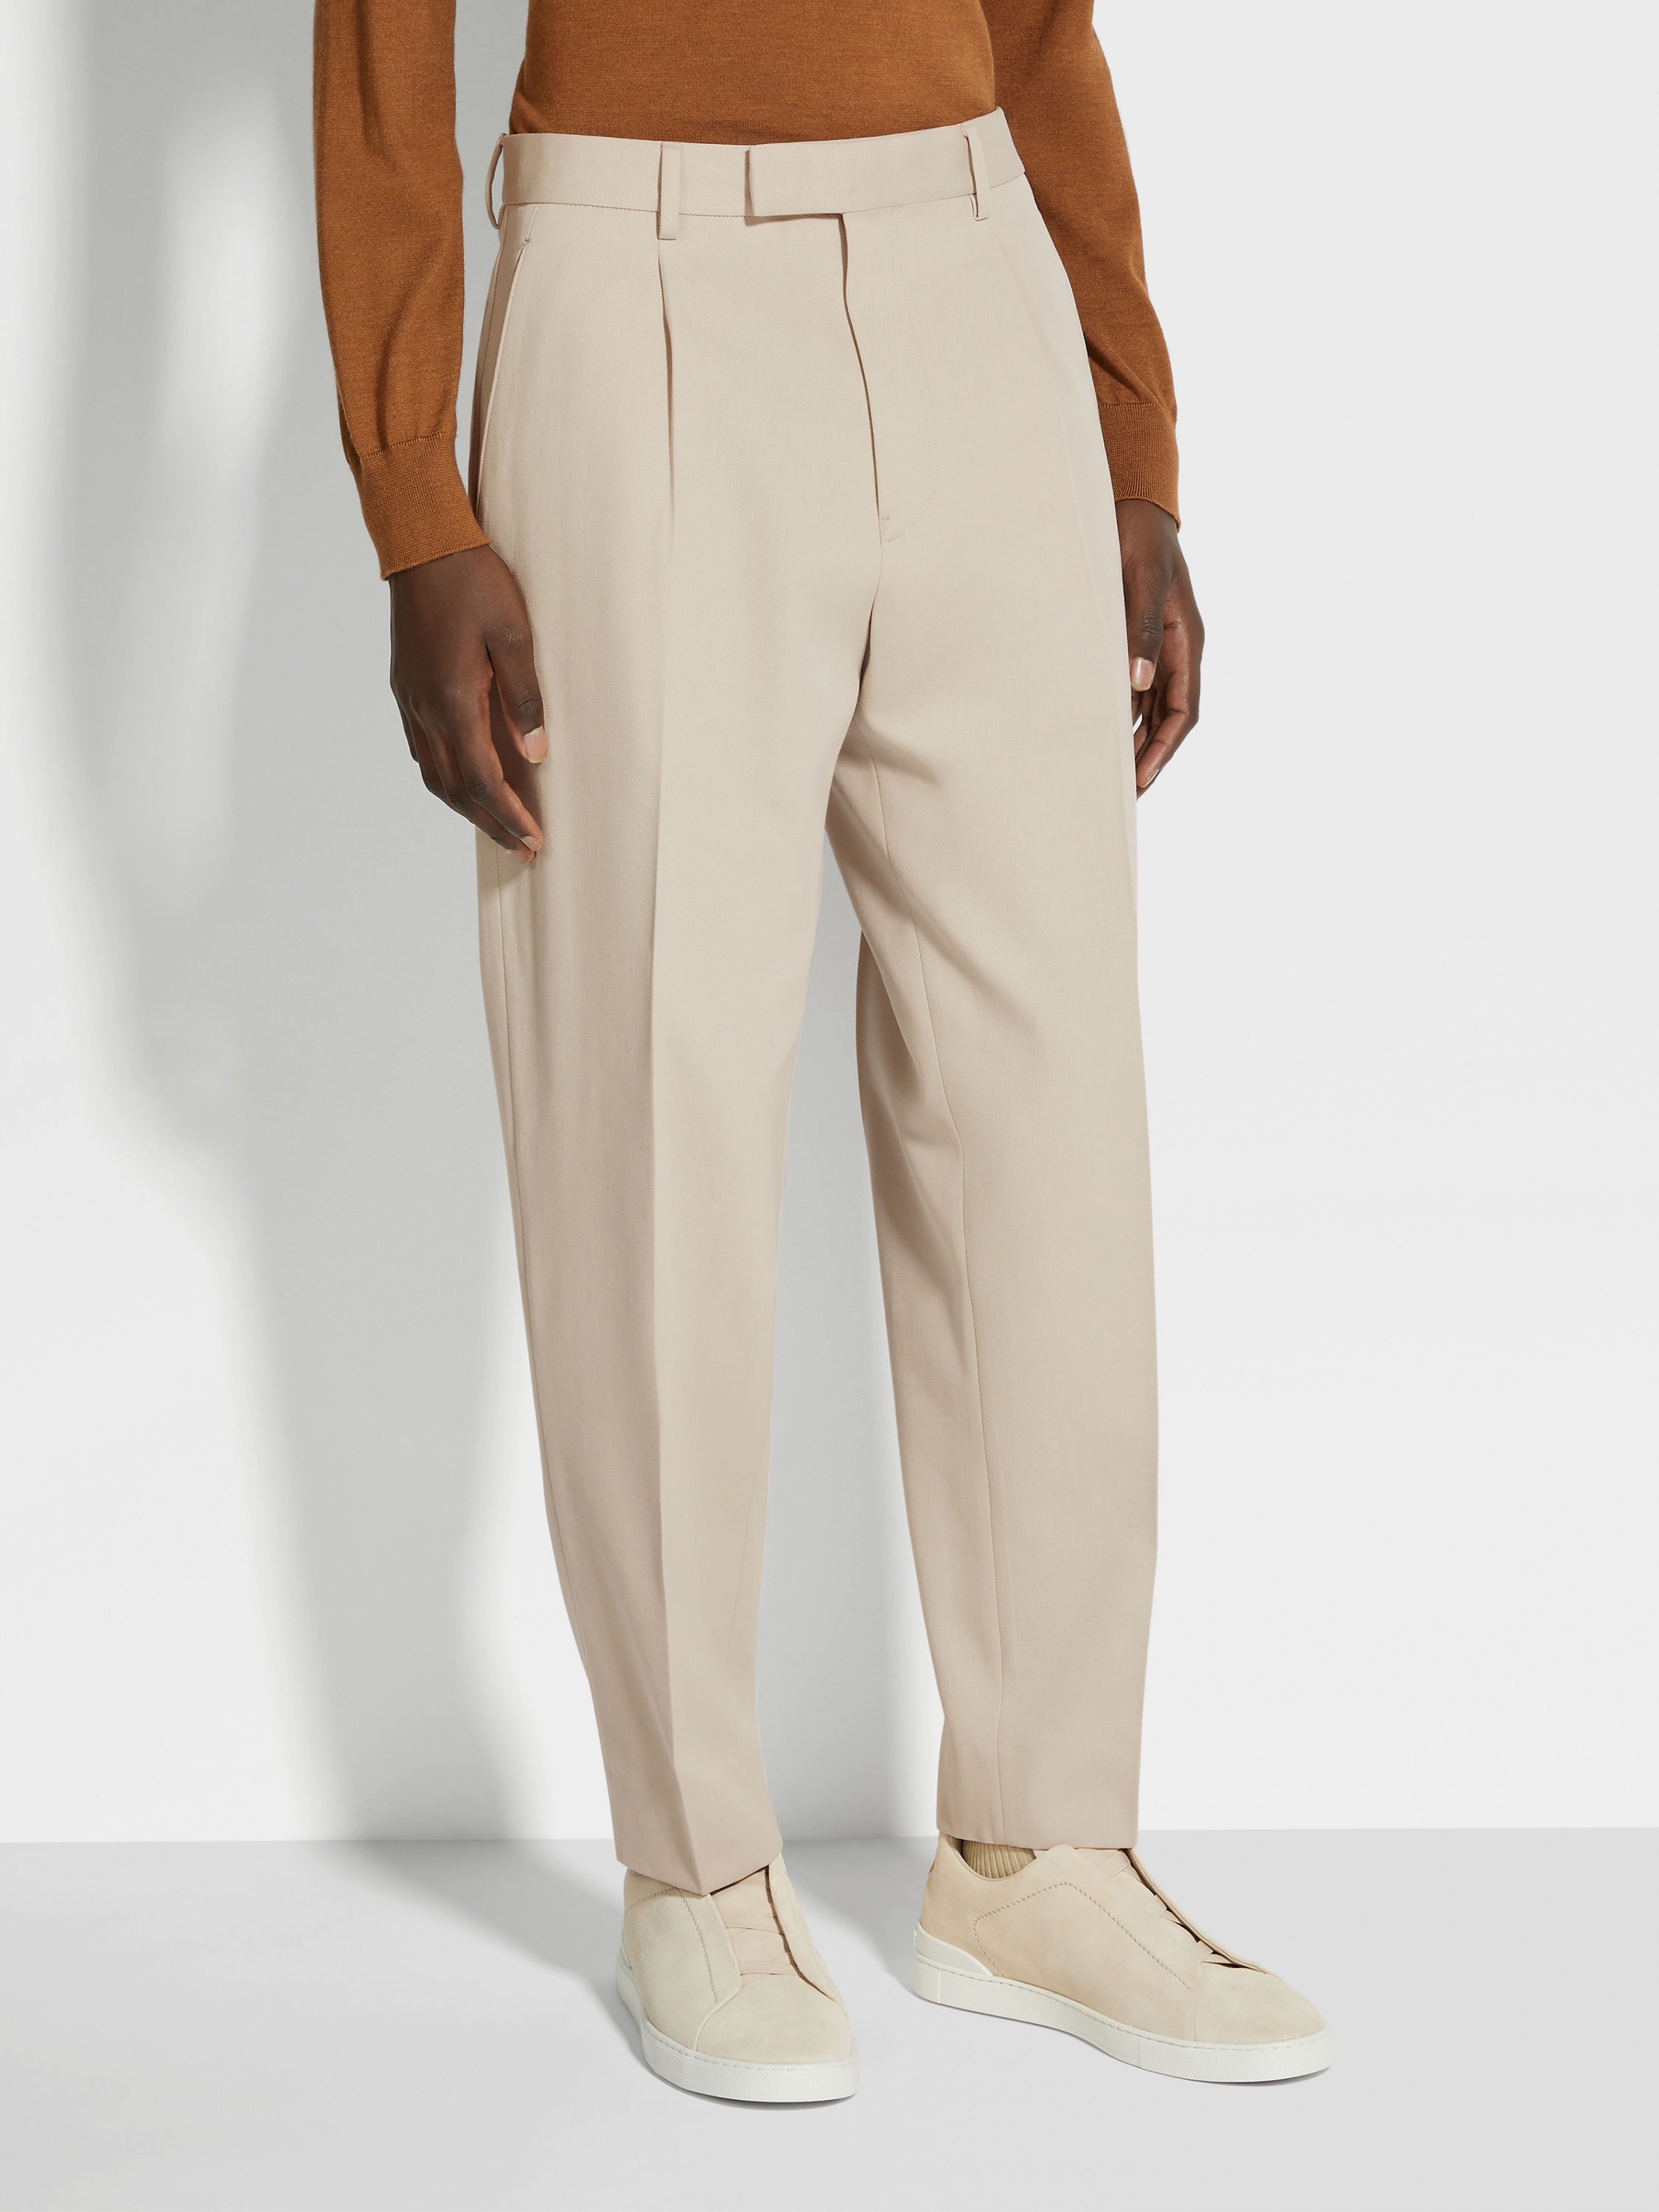 LIGHT BEIGE COTTON AND WOOL PANTS - 5